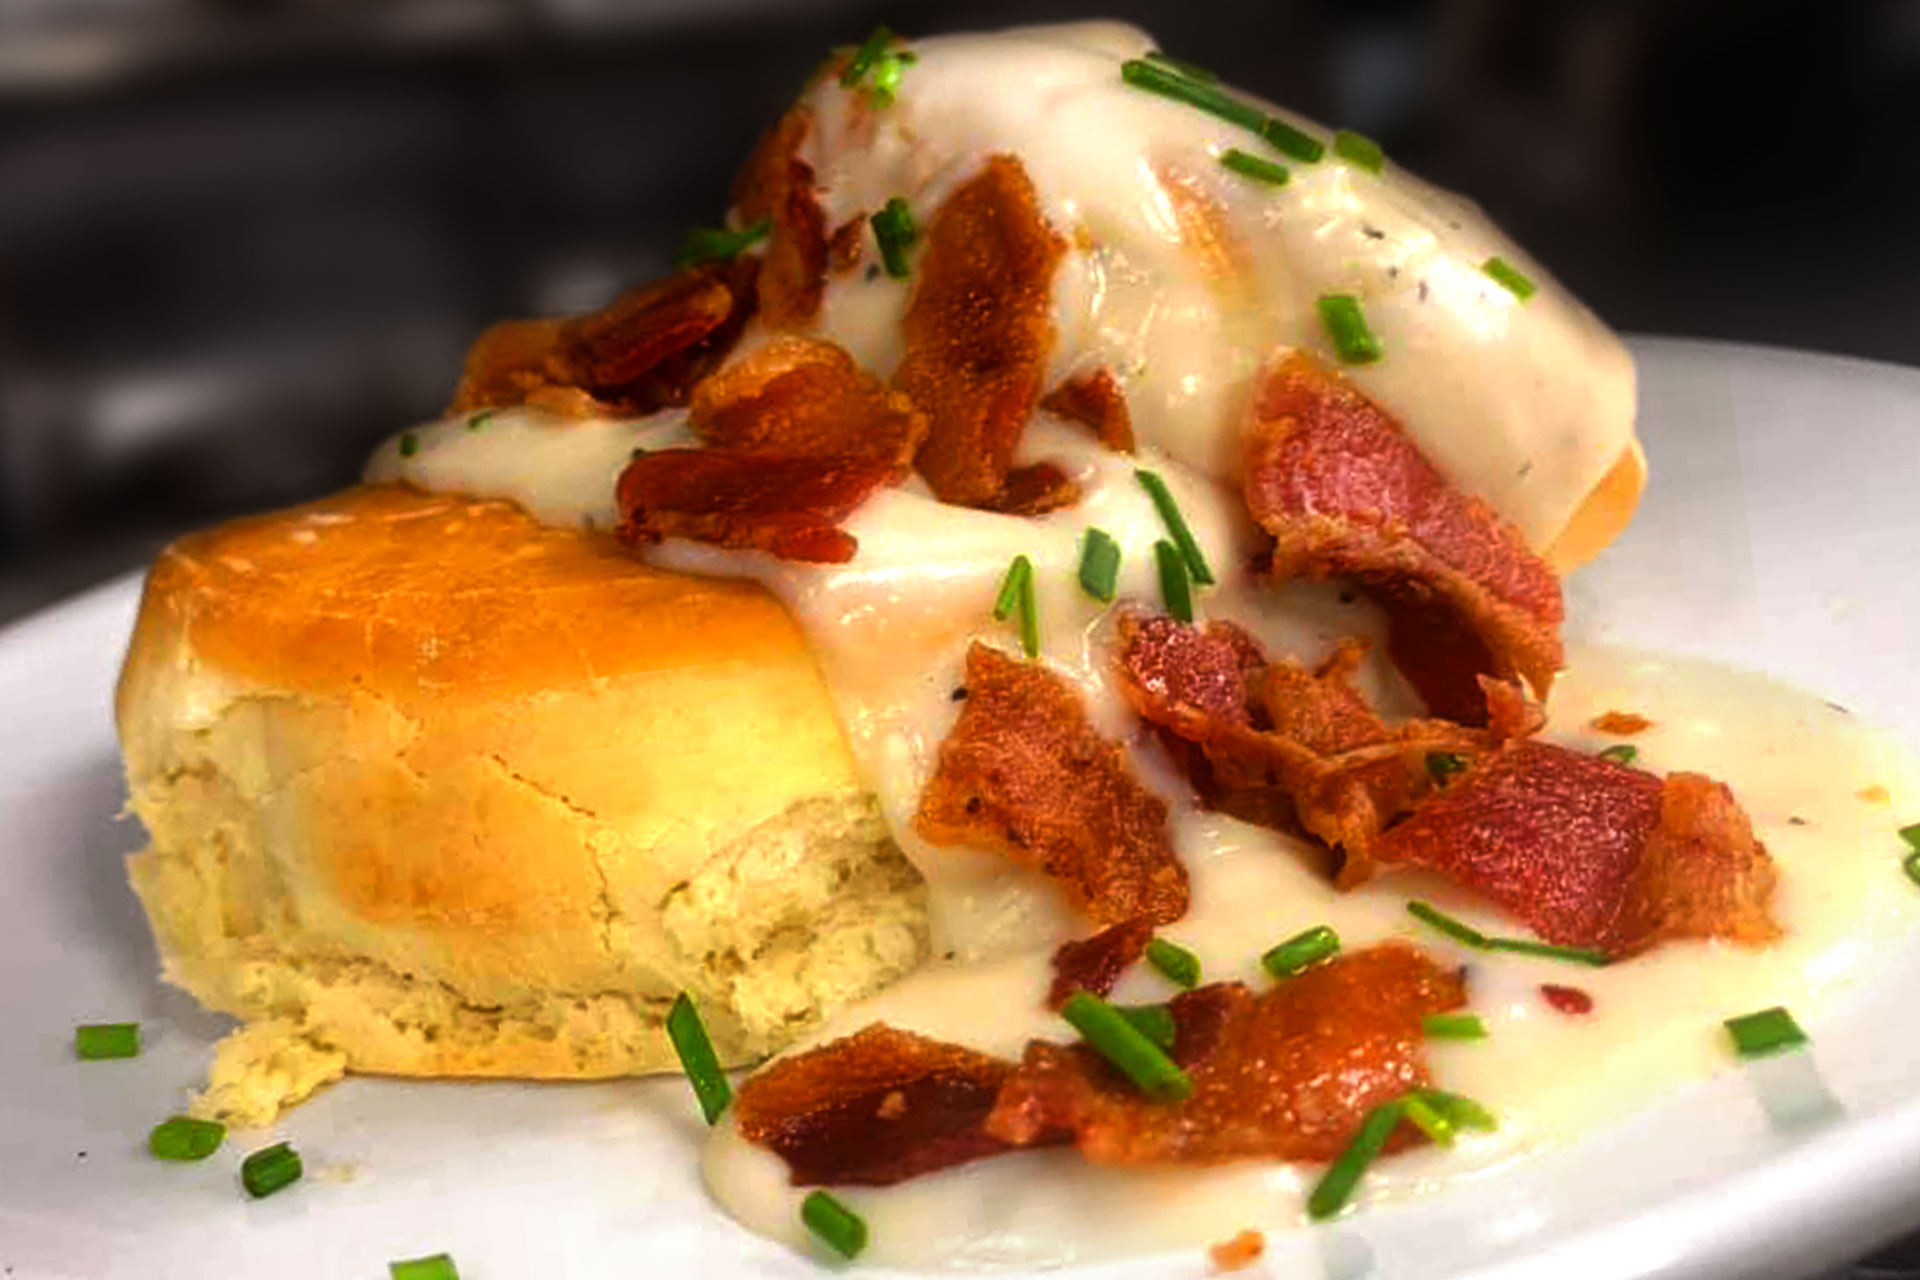 Biscuits and Gravy at 2020 Market